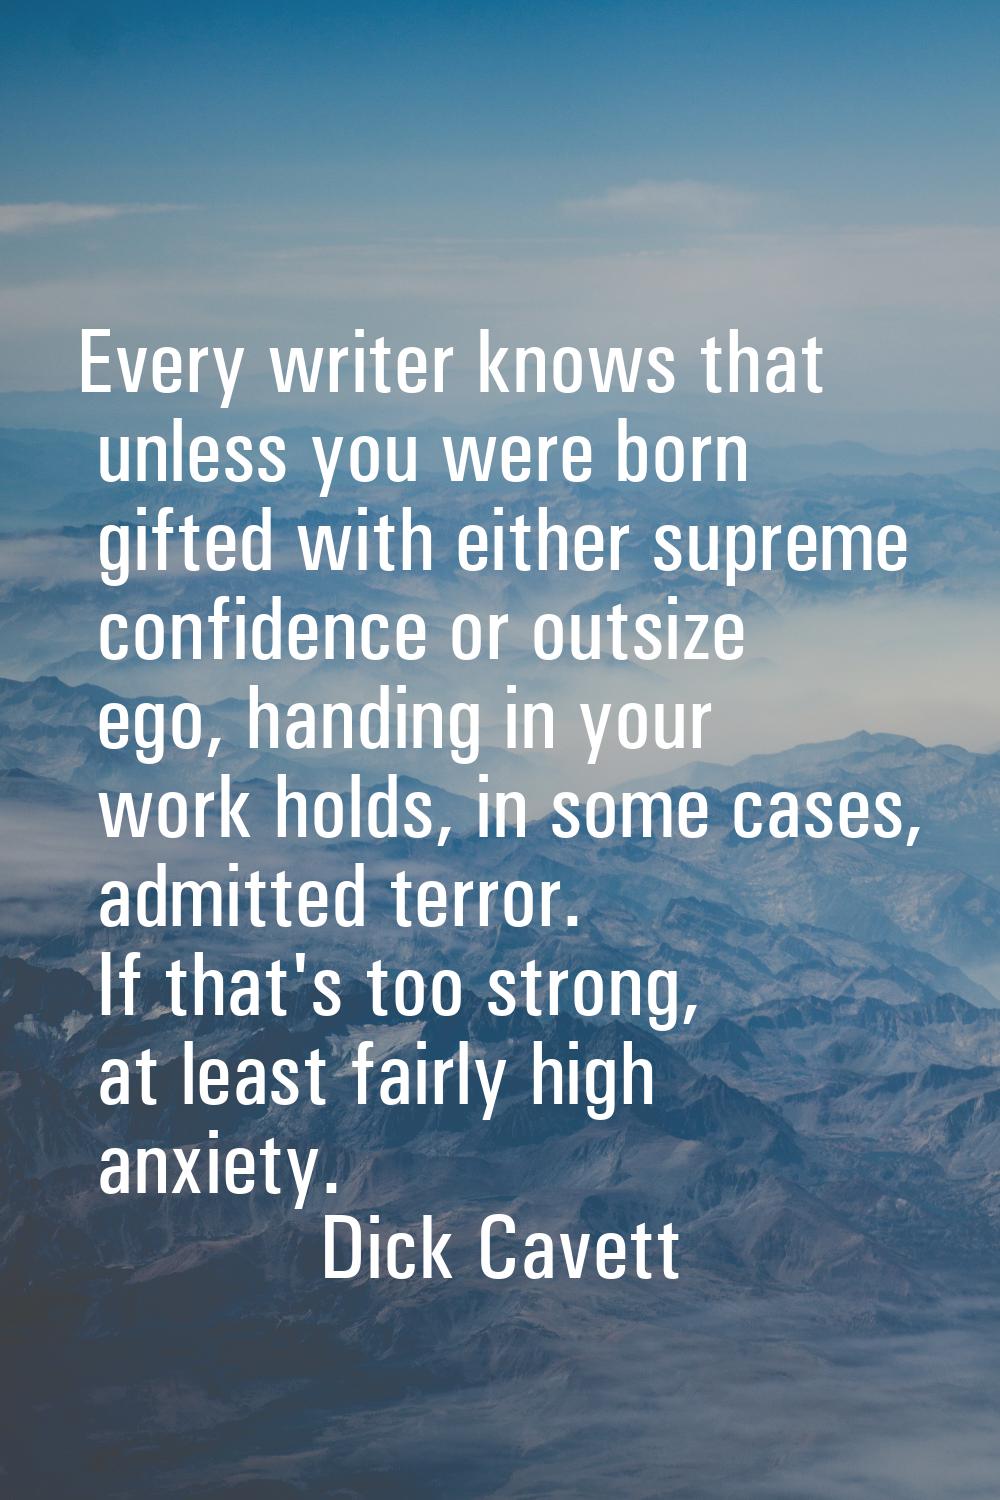 Every writer knows that unless you were born gifted with either supreme confidence or outsize ego, 